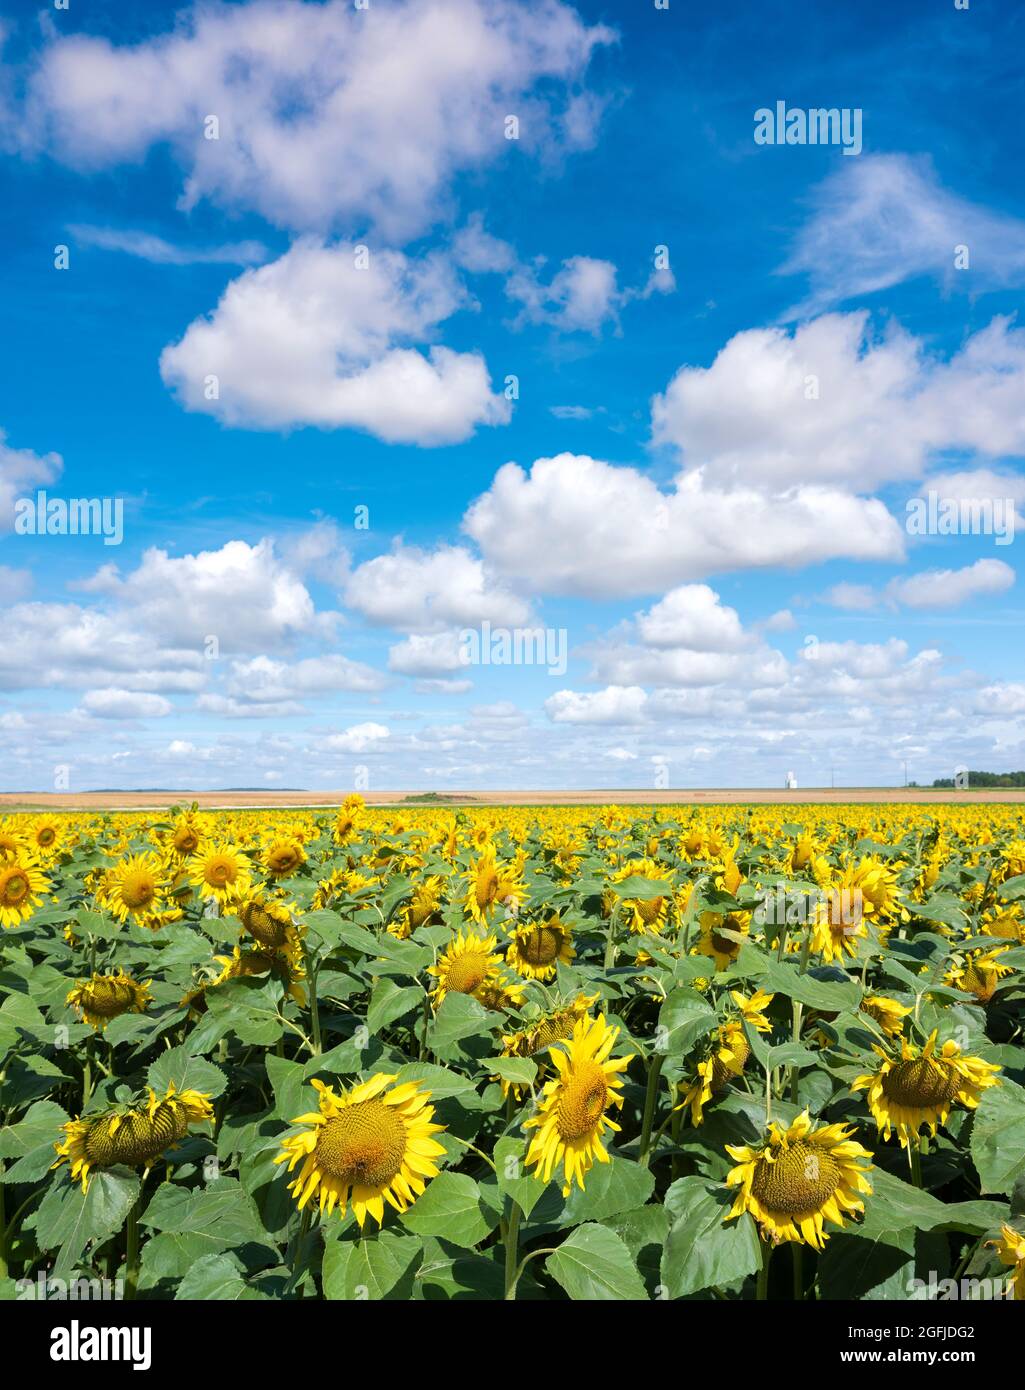 field with sunflowers under blue sky in french champagne ardennes landscape near city of reims Stock Photo